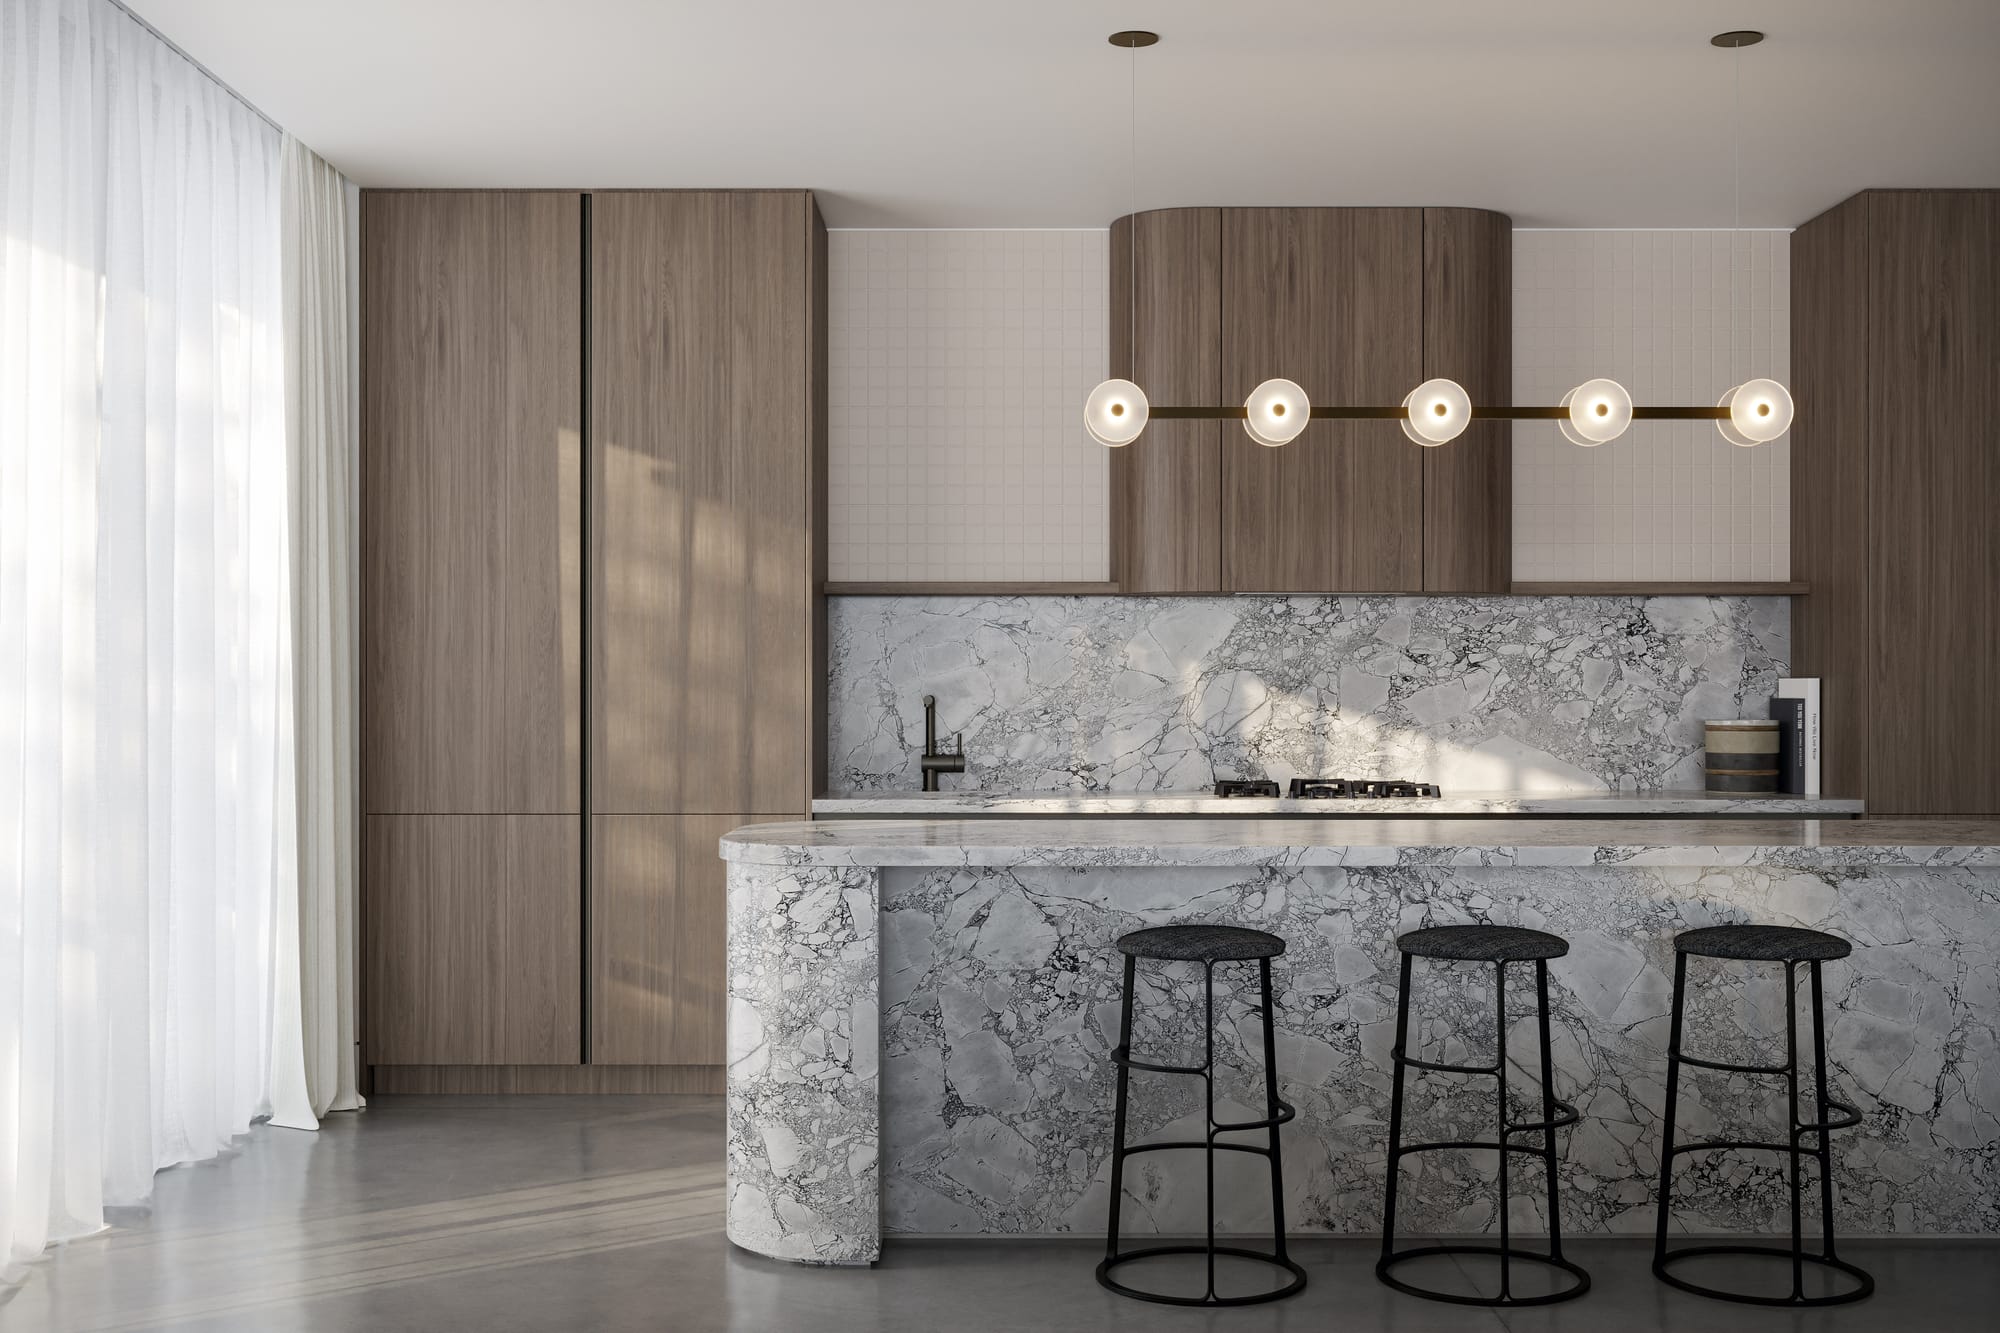 Coral Linear Bar Pendant Light by SOKTAS. Copyright of SOKTAS. Linear pendant light with ring lights hanging above marble island benchtop.